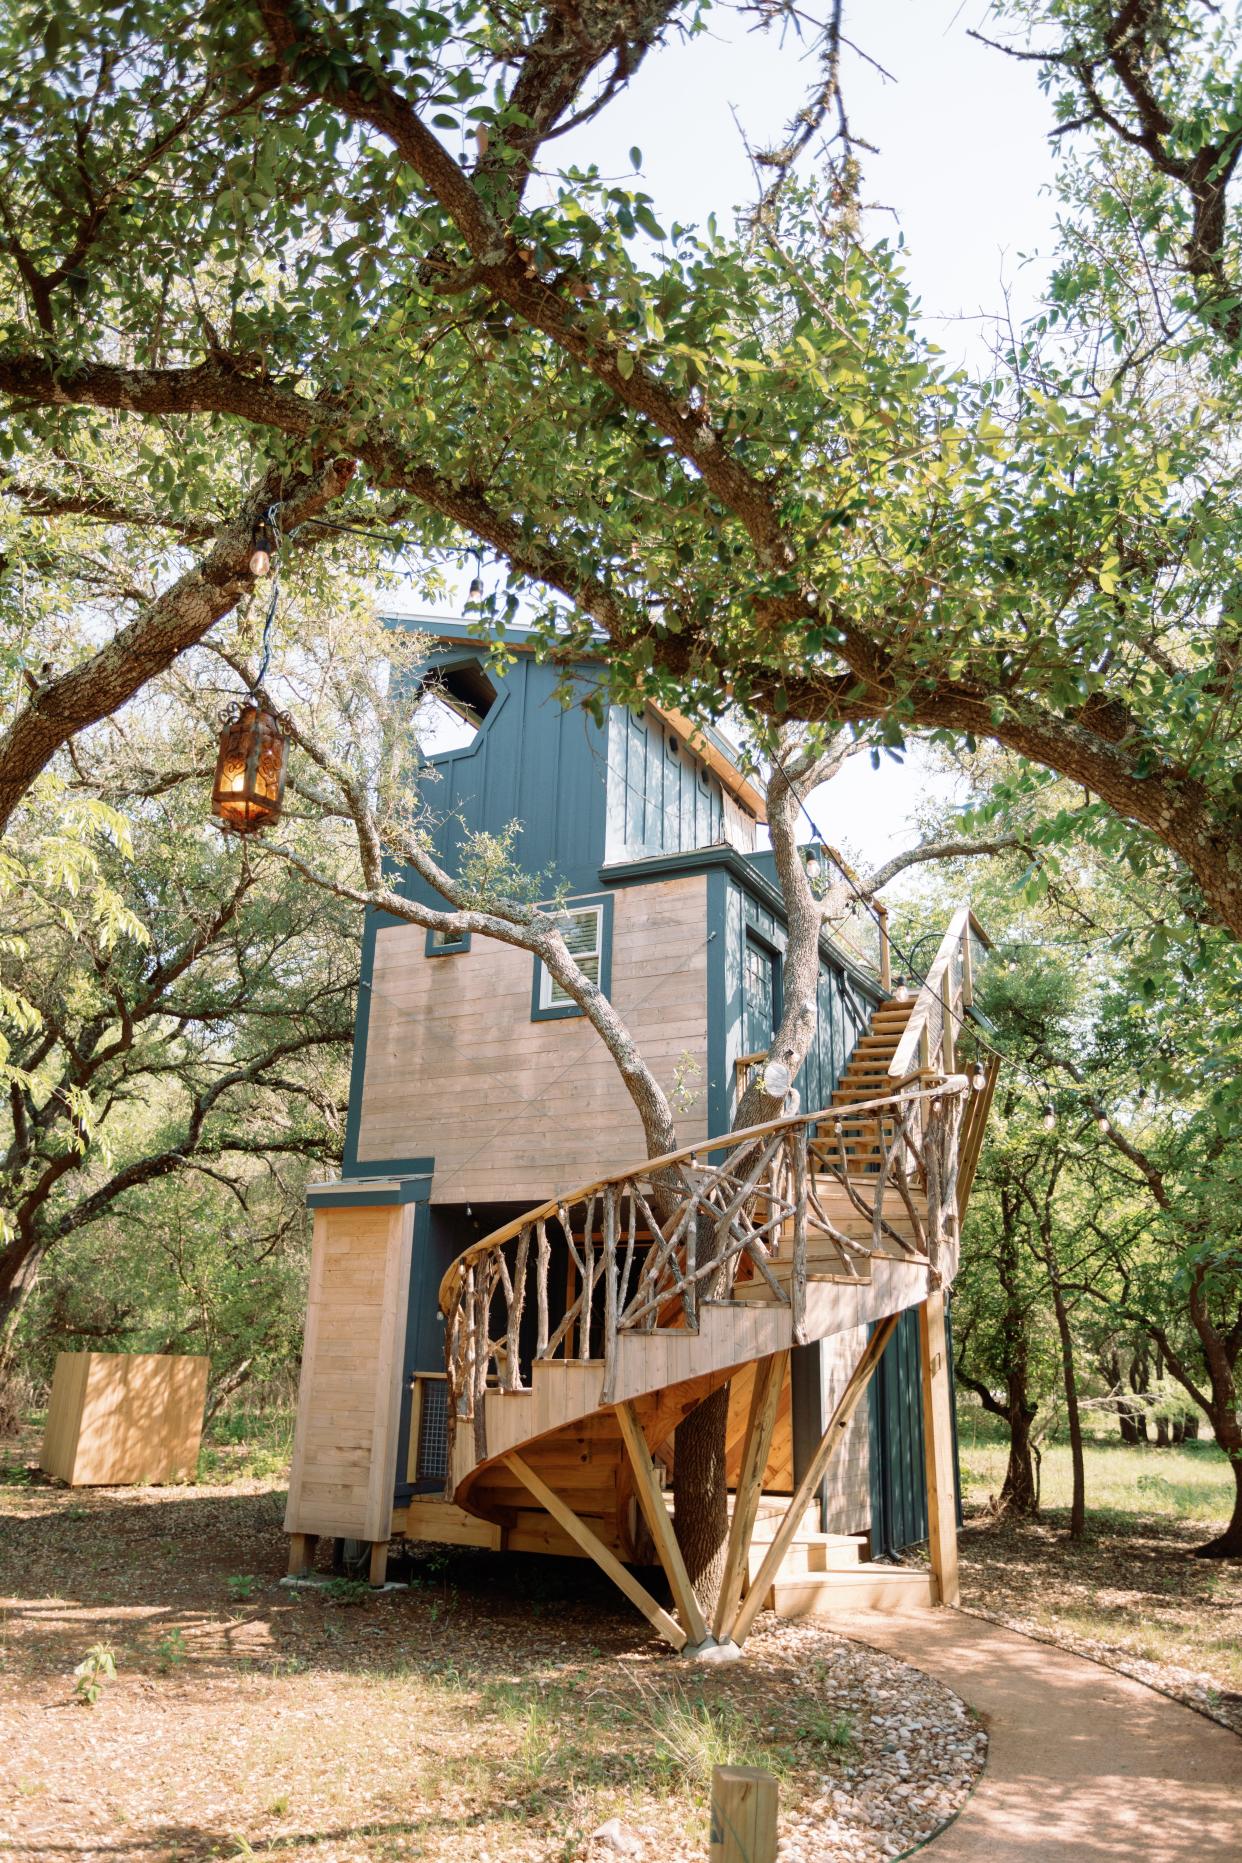 The Acorn treehouse at HoneyTree in Fredericksburg, Texas, which lays in the path of totality for the April 8, 2024 eclipse.